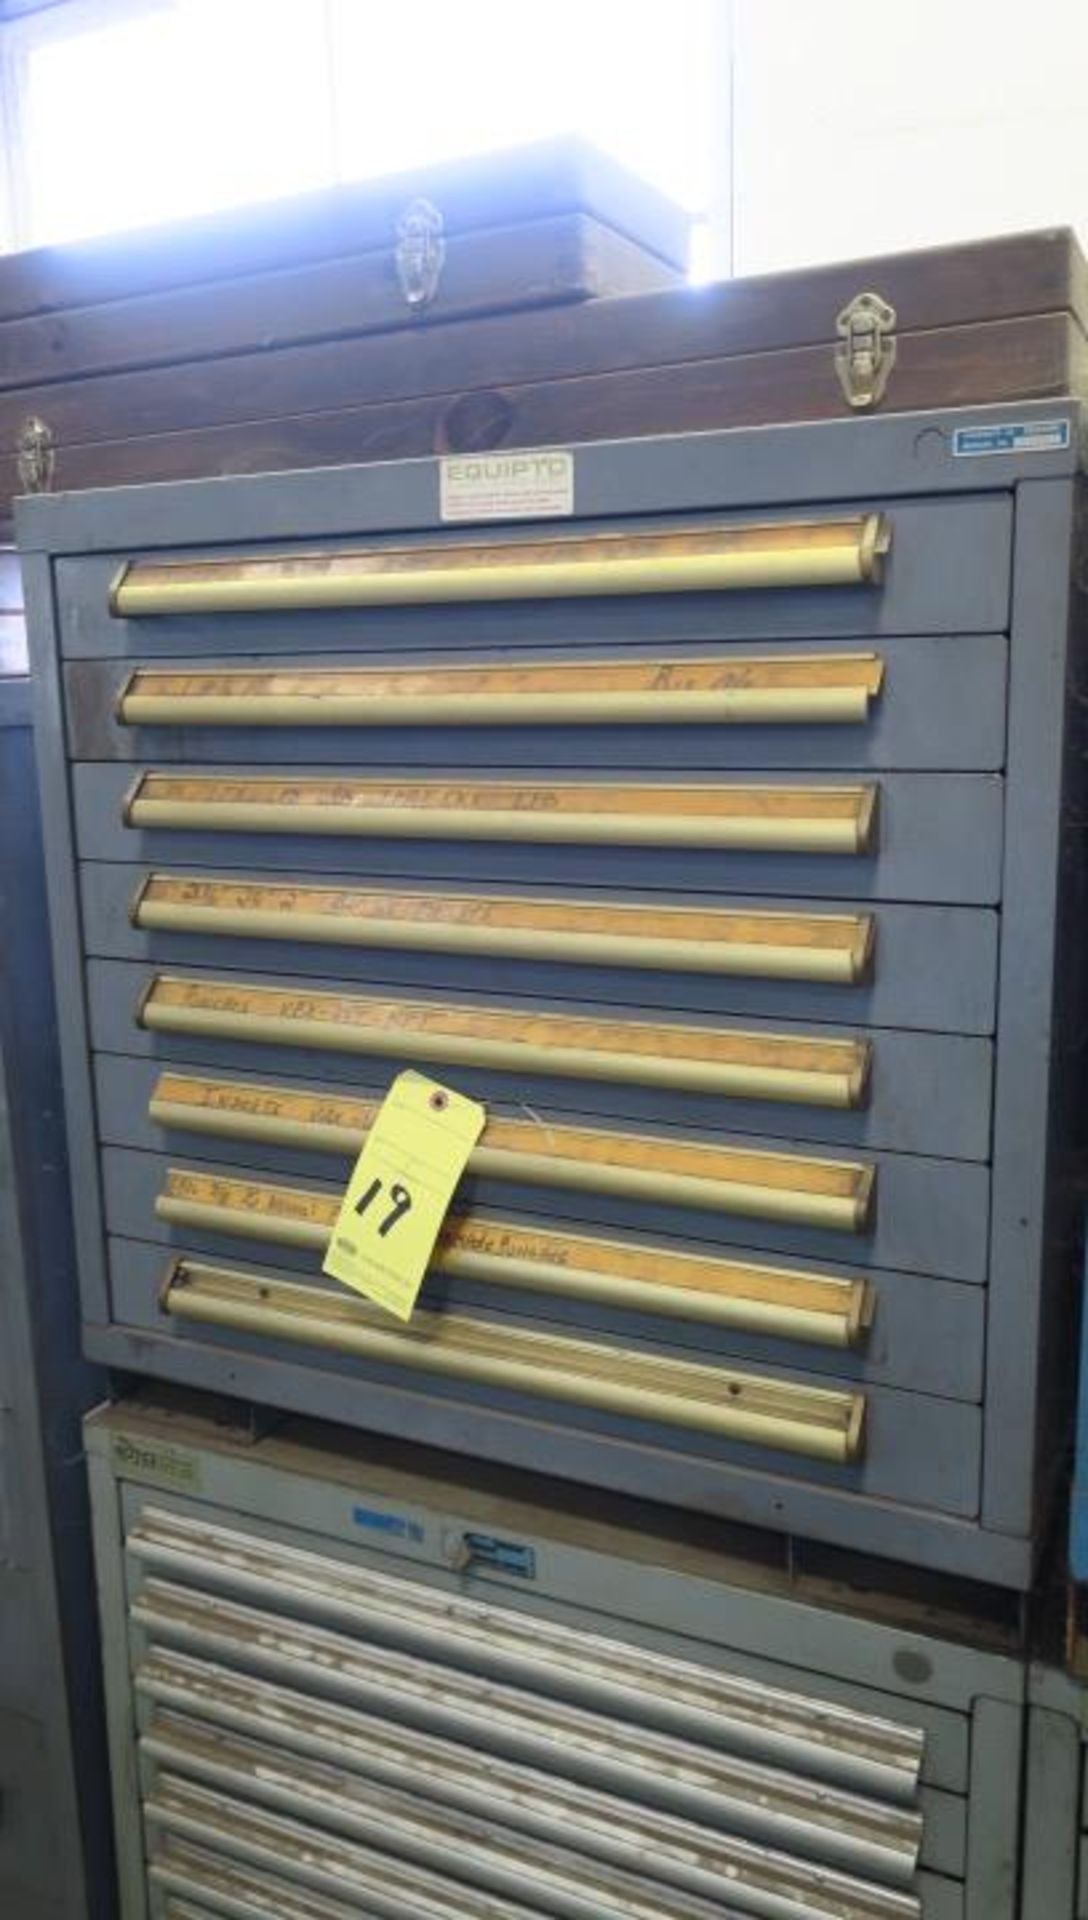 LOT CONSISTING OF: large selection of die parts including punches, inserts, dowel pins, etc. (top